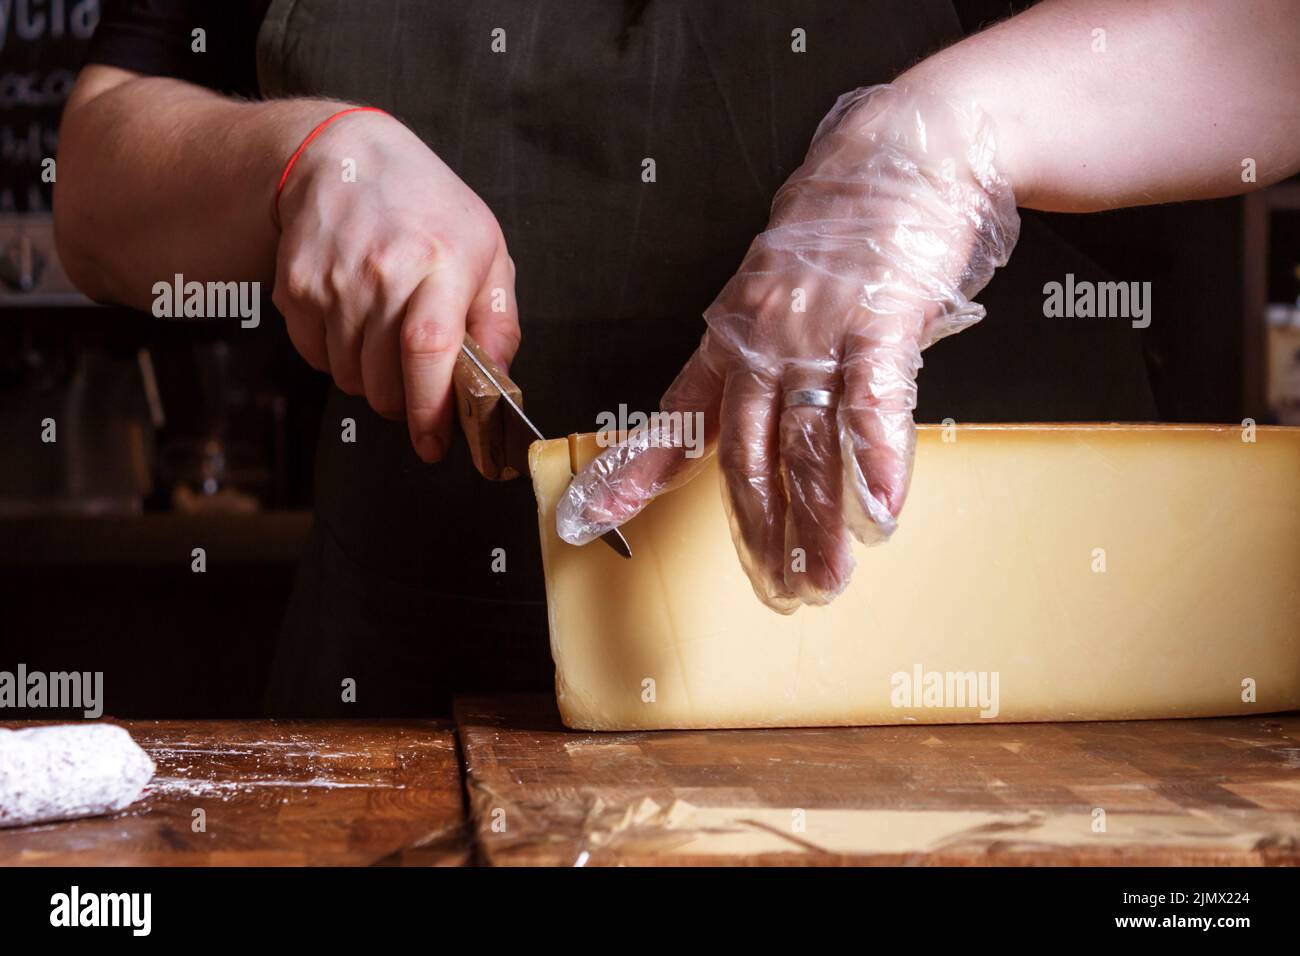 Saleswoman cutting cheese for sale. Cheese shop. Stock Photo